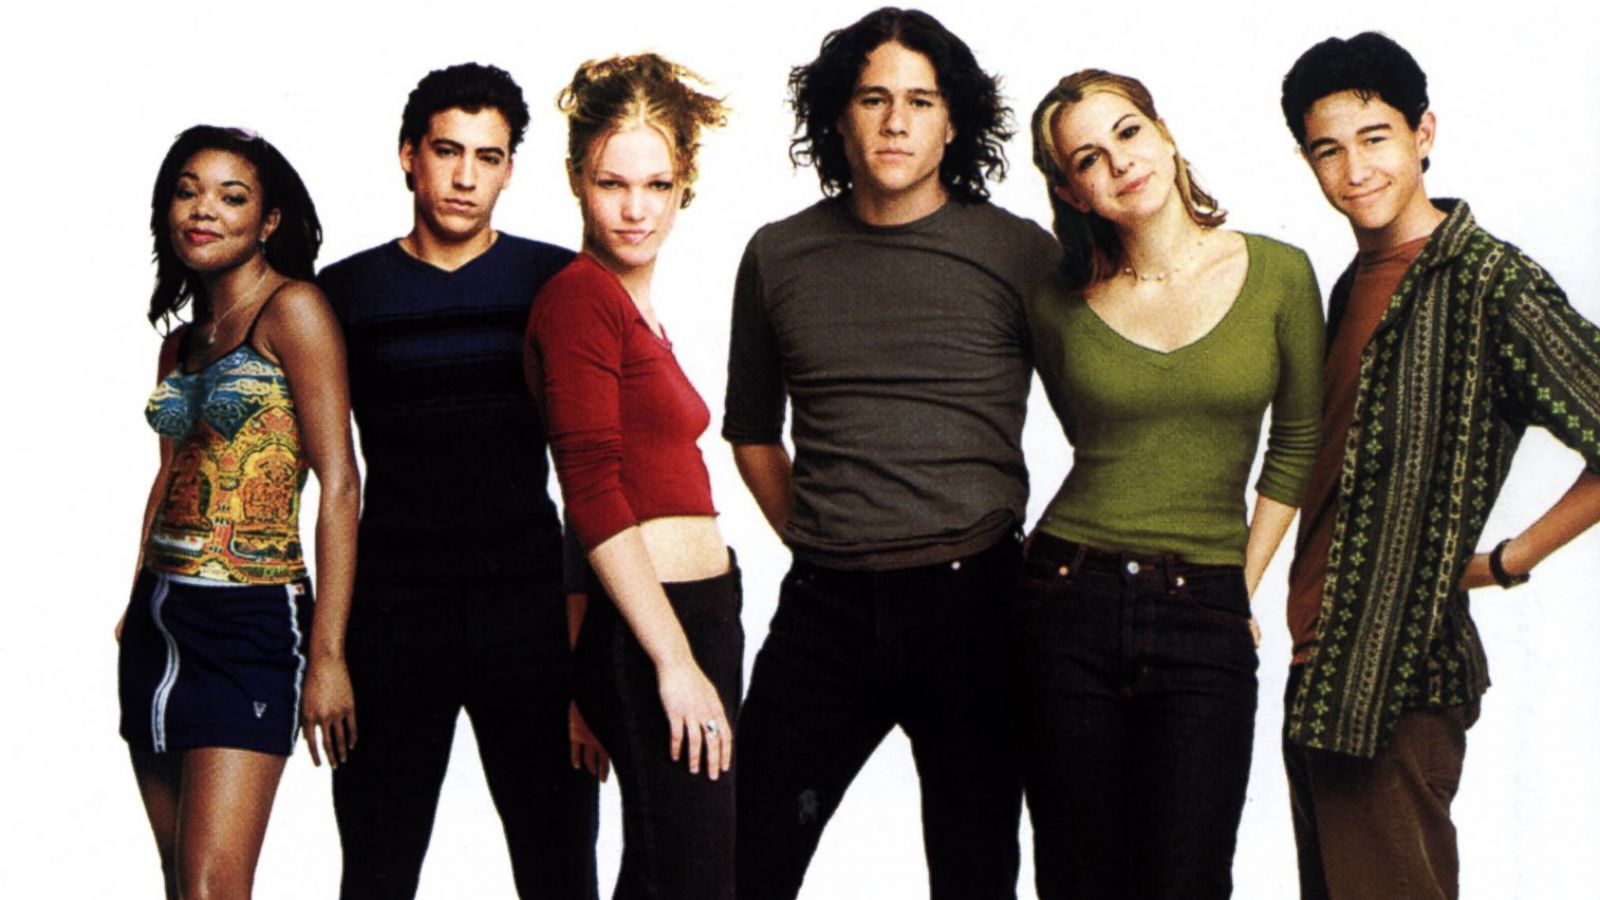 10 Things I Hate About You Movie 1999 - HD Wallpaper 